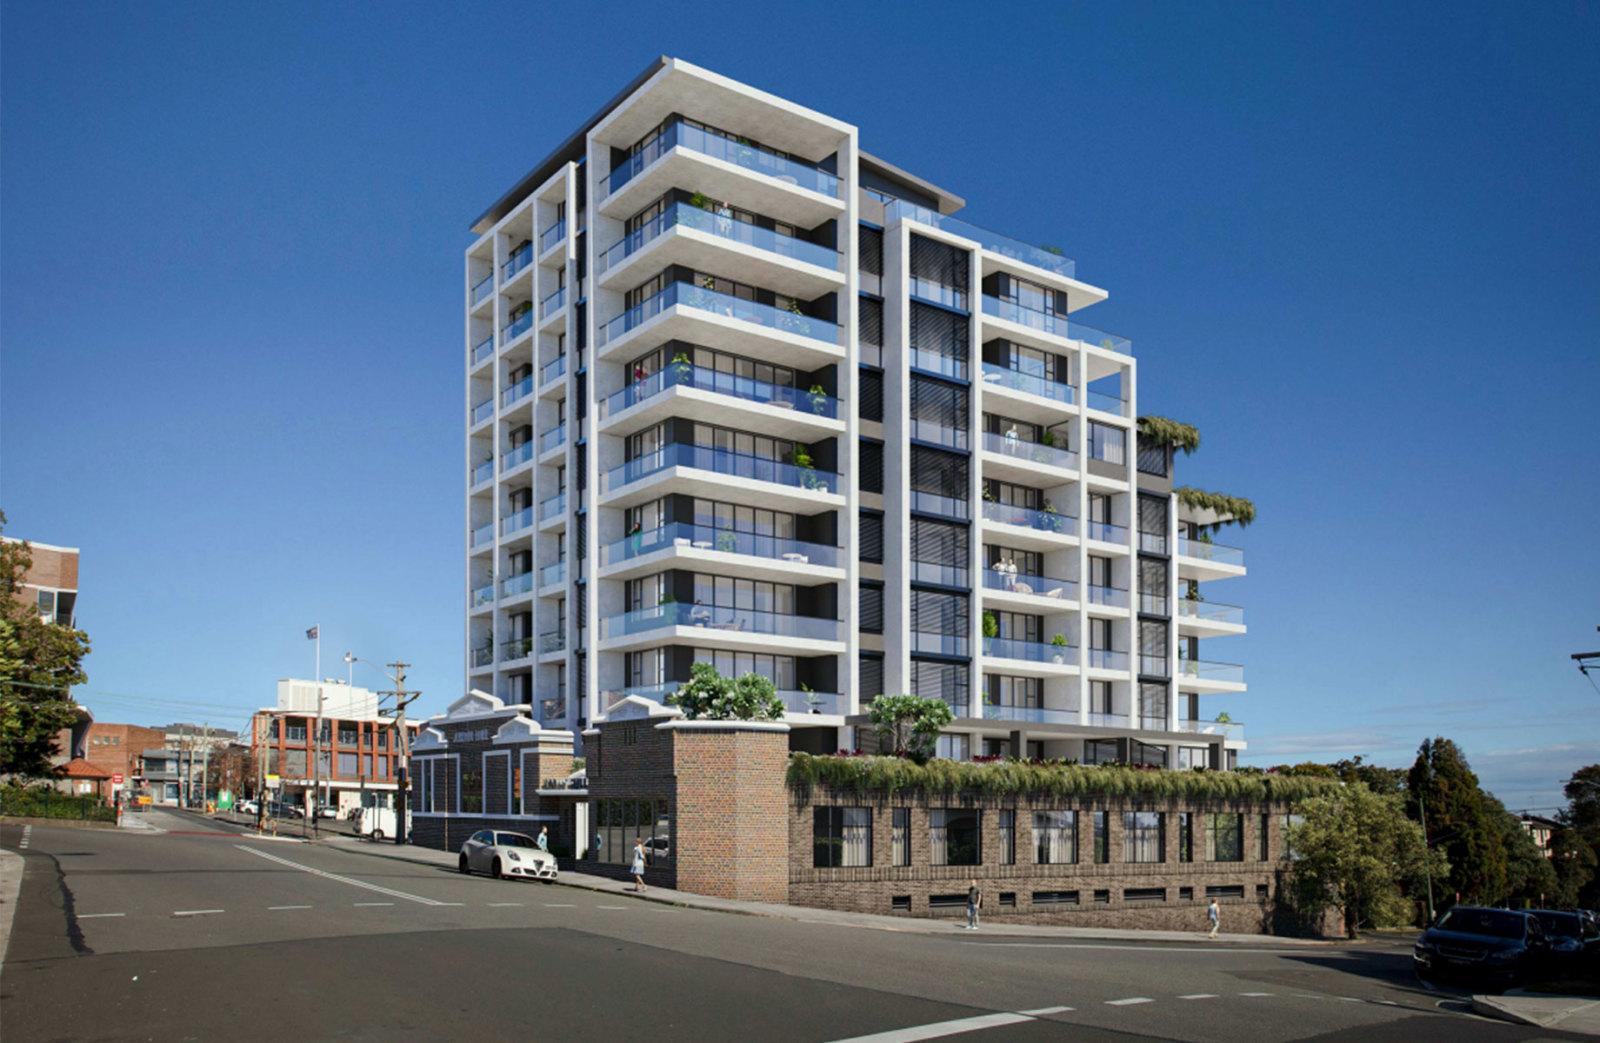 The vertical retirement village proposed for the Gladesville RSL Community Club site in 2021.